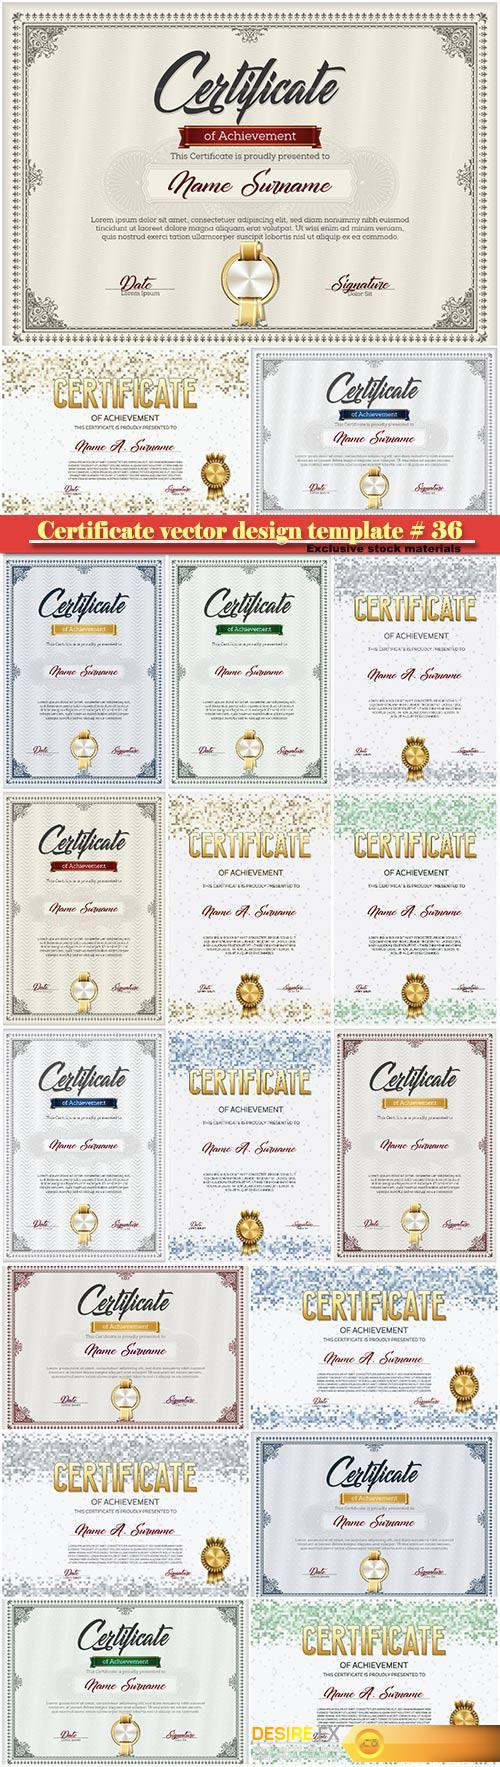 Certificate and vector diploma design template # 36